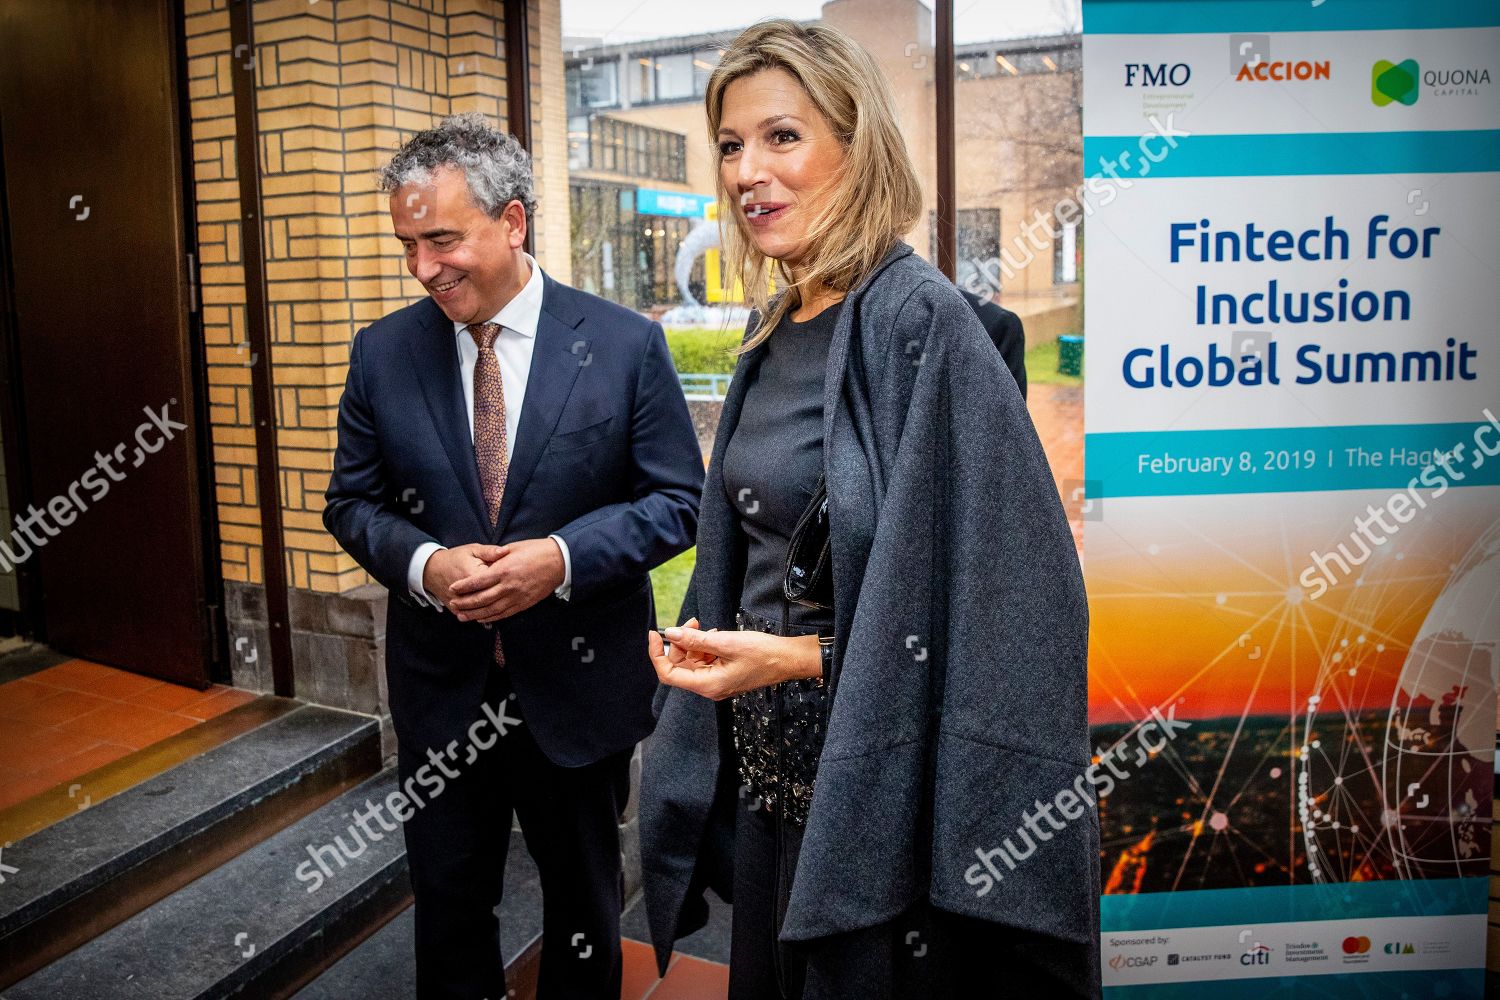 fintech-for-inclusion-conference-the-hague-netherlands-shutterstock-editorial-10098443f.jpg